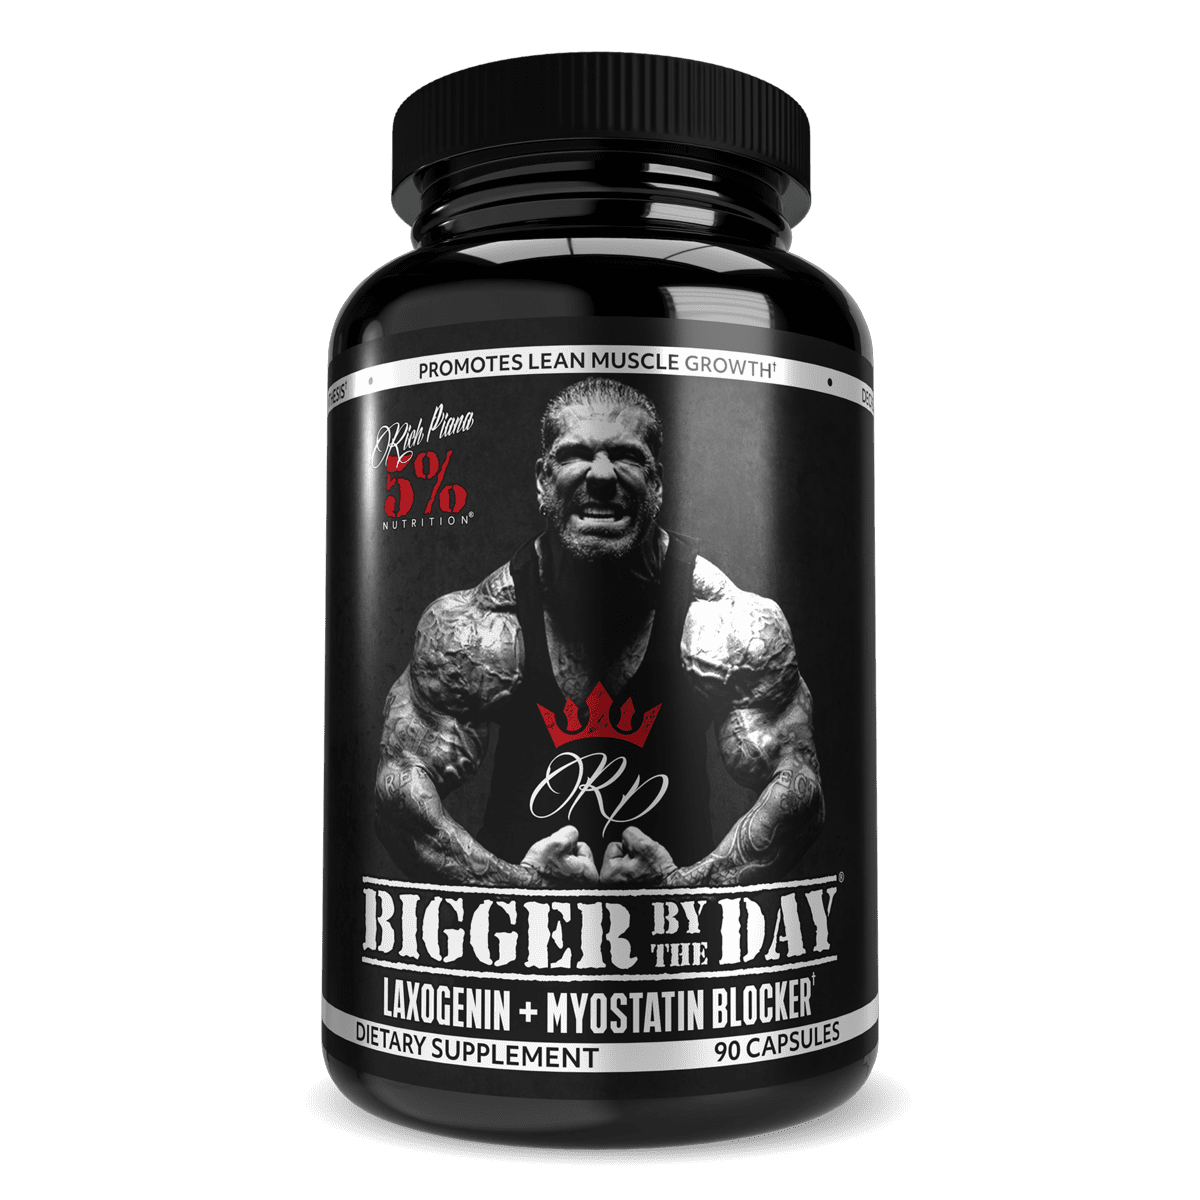 5%Nutrition - Bigger By The Day